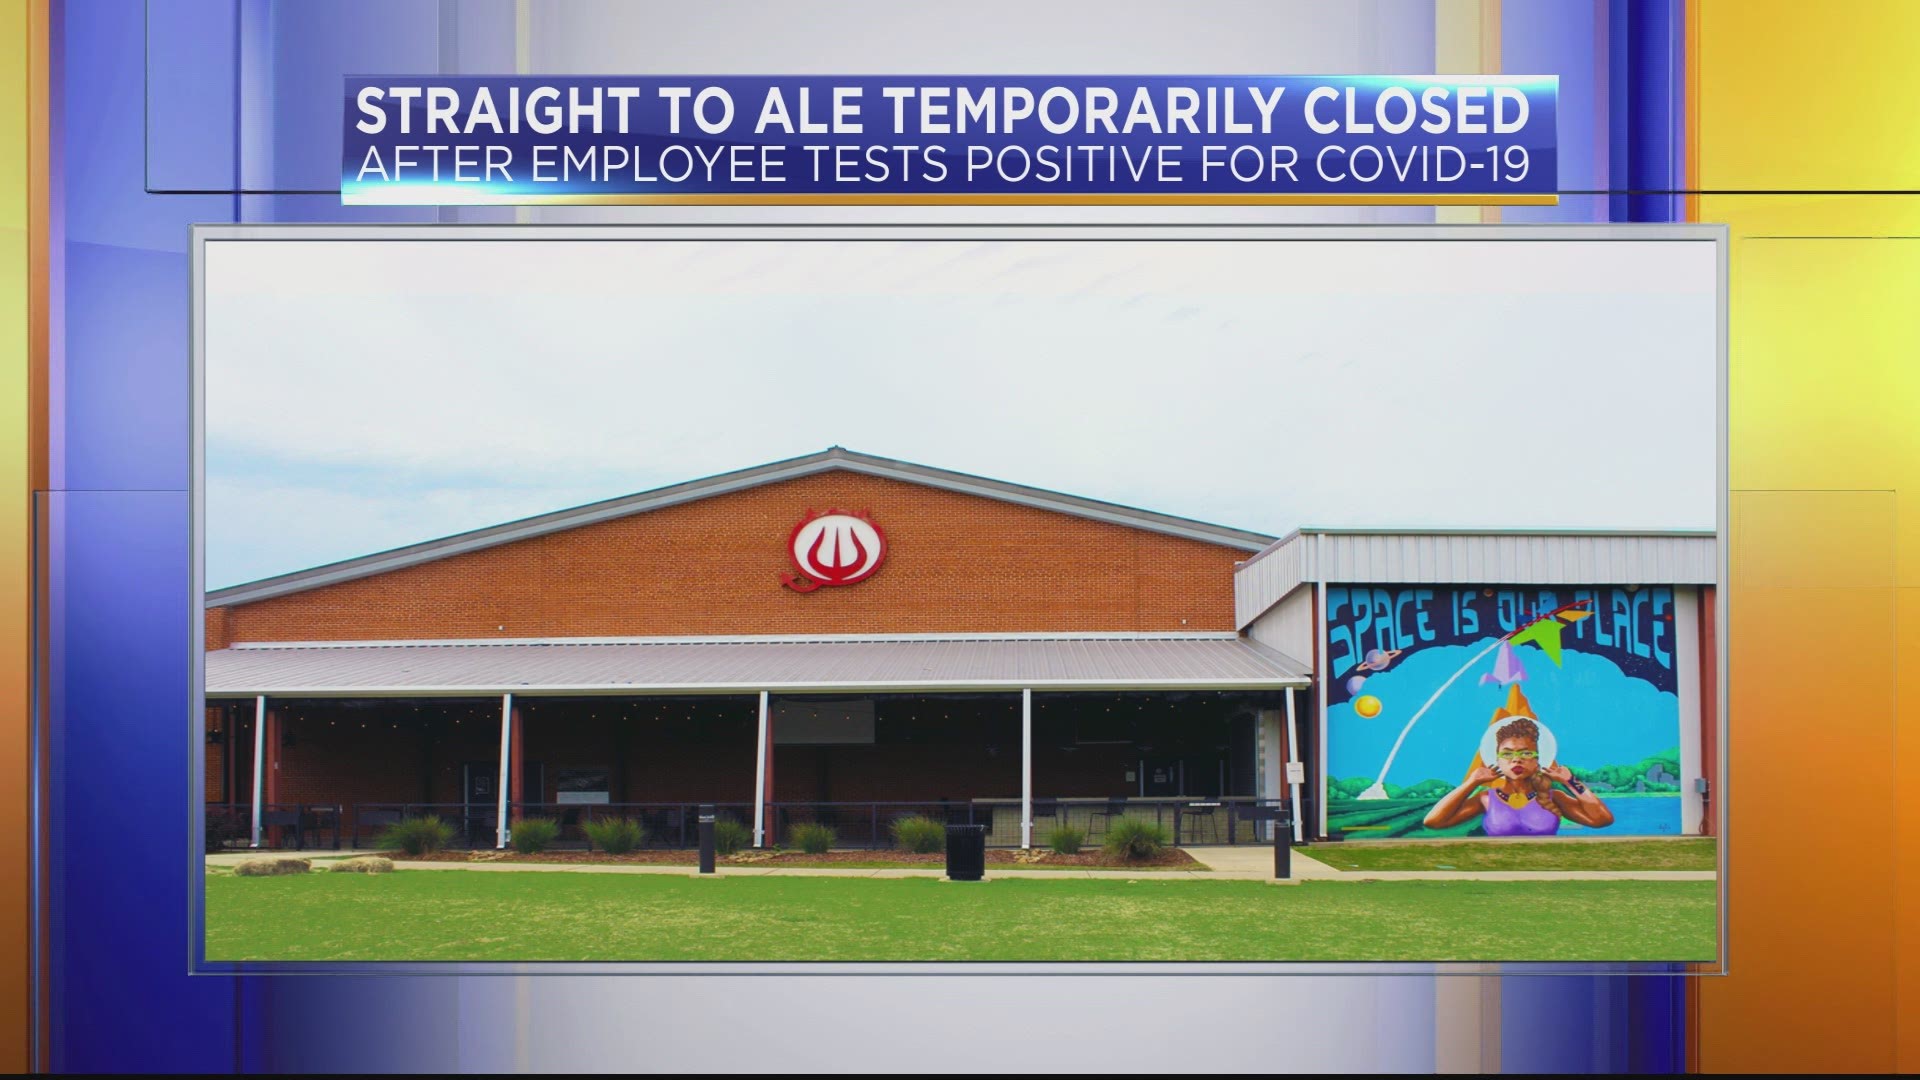 The brewery said they are following CDC guidelines in order to reopen as soon as they safely can.